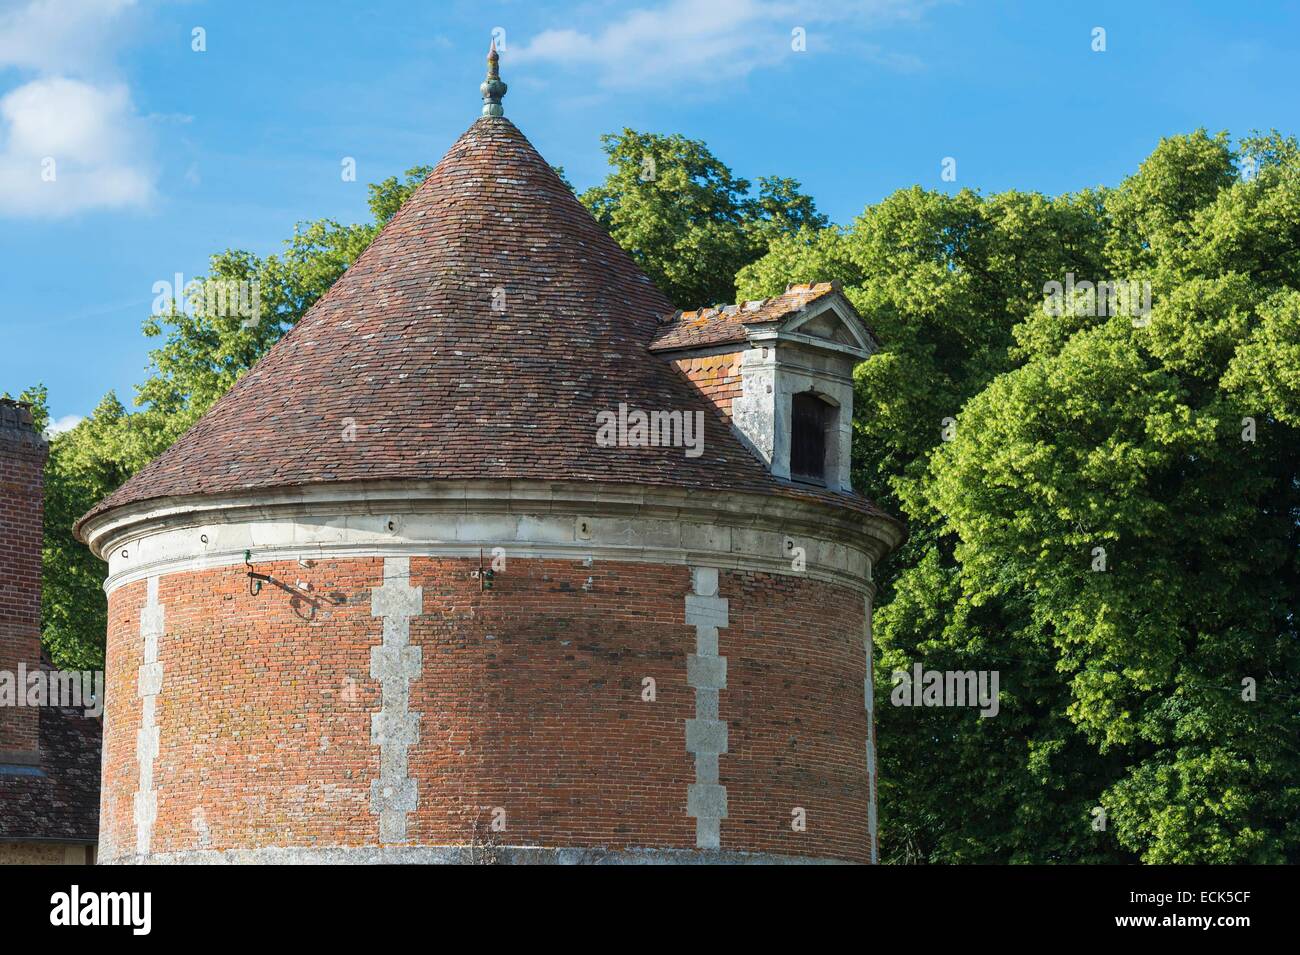 France, Eure, Fontaine l'Abbe, the 18th century dovecote Stock Photo